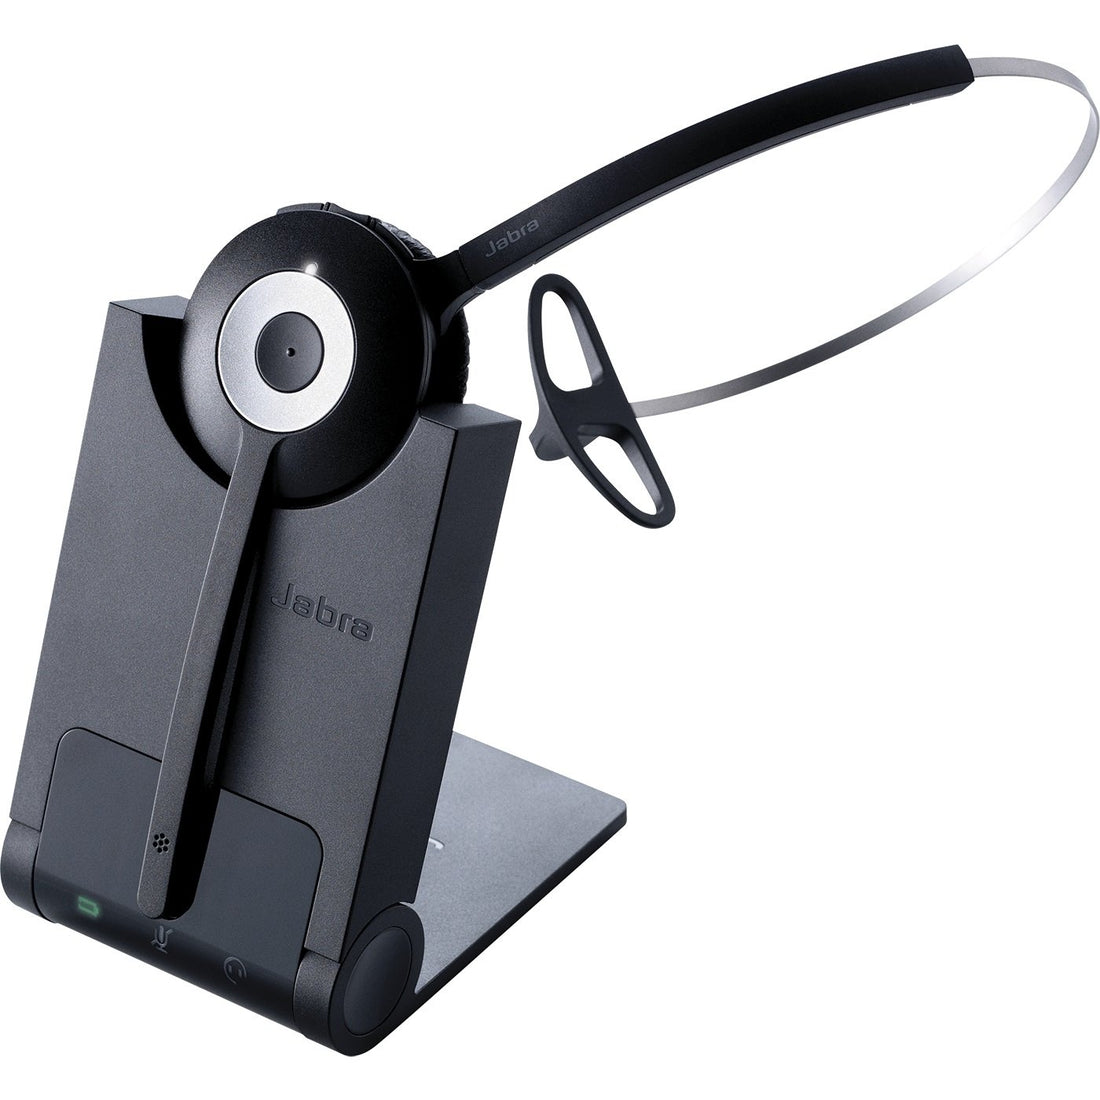 Jabra PRO 920 Headset - Mono - Wireless - DECT - 394 ft - Over-the-head, Over-the-ear, Behind-the-neck - Monaural - Ear-cup